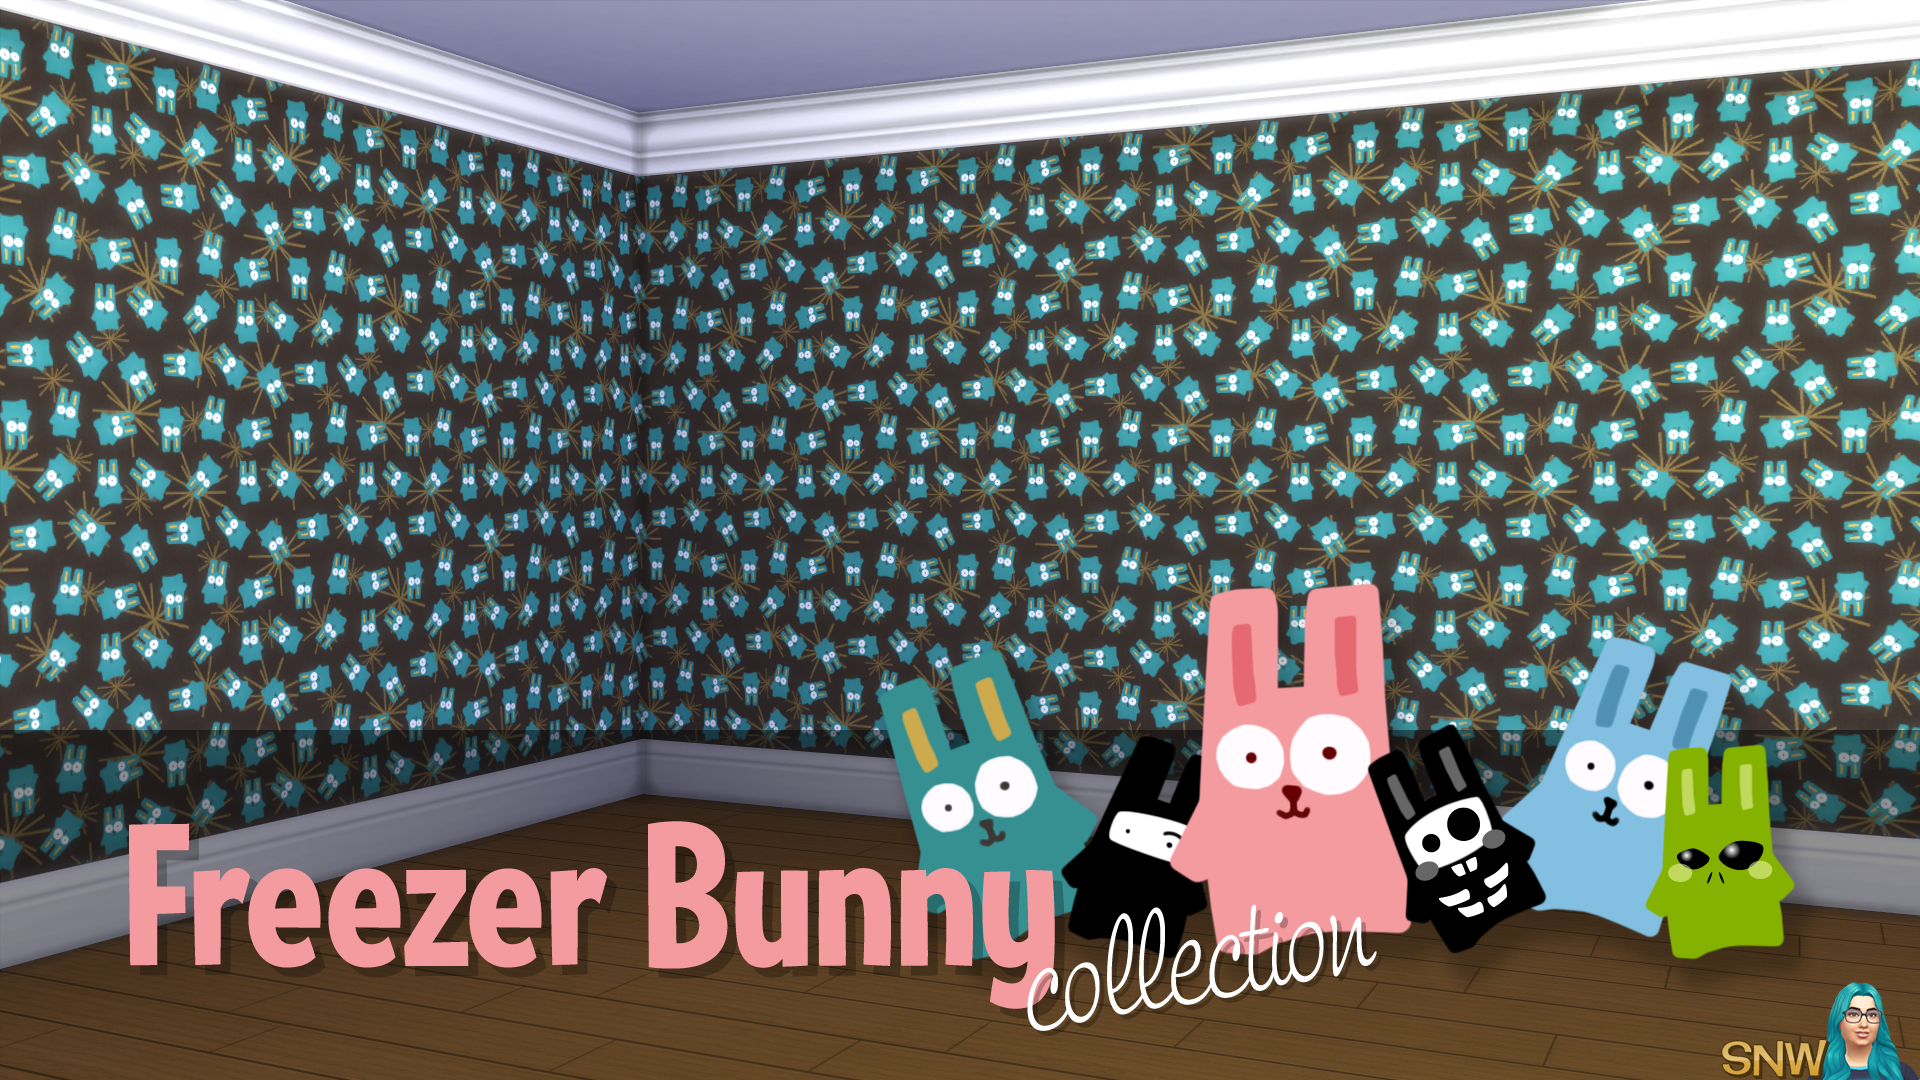 Freezer Bunny Collection: Small Bunnies/Starburst Wallpapers